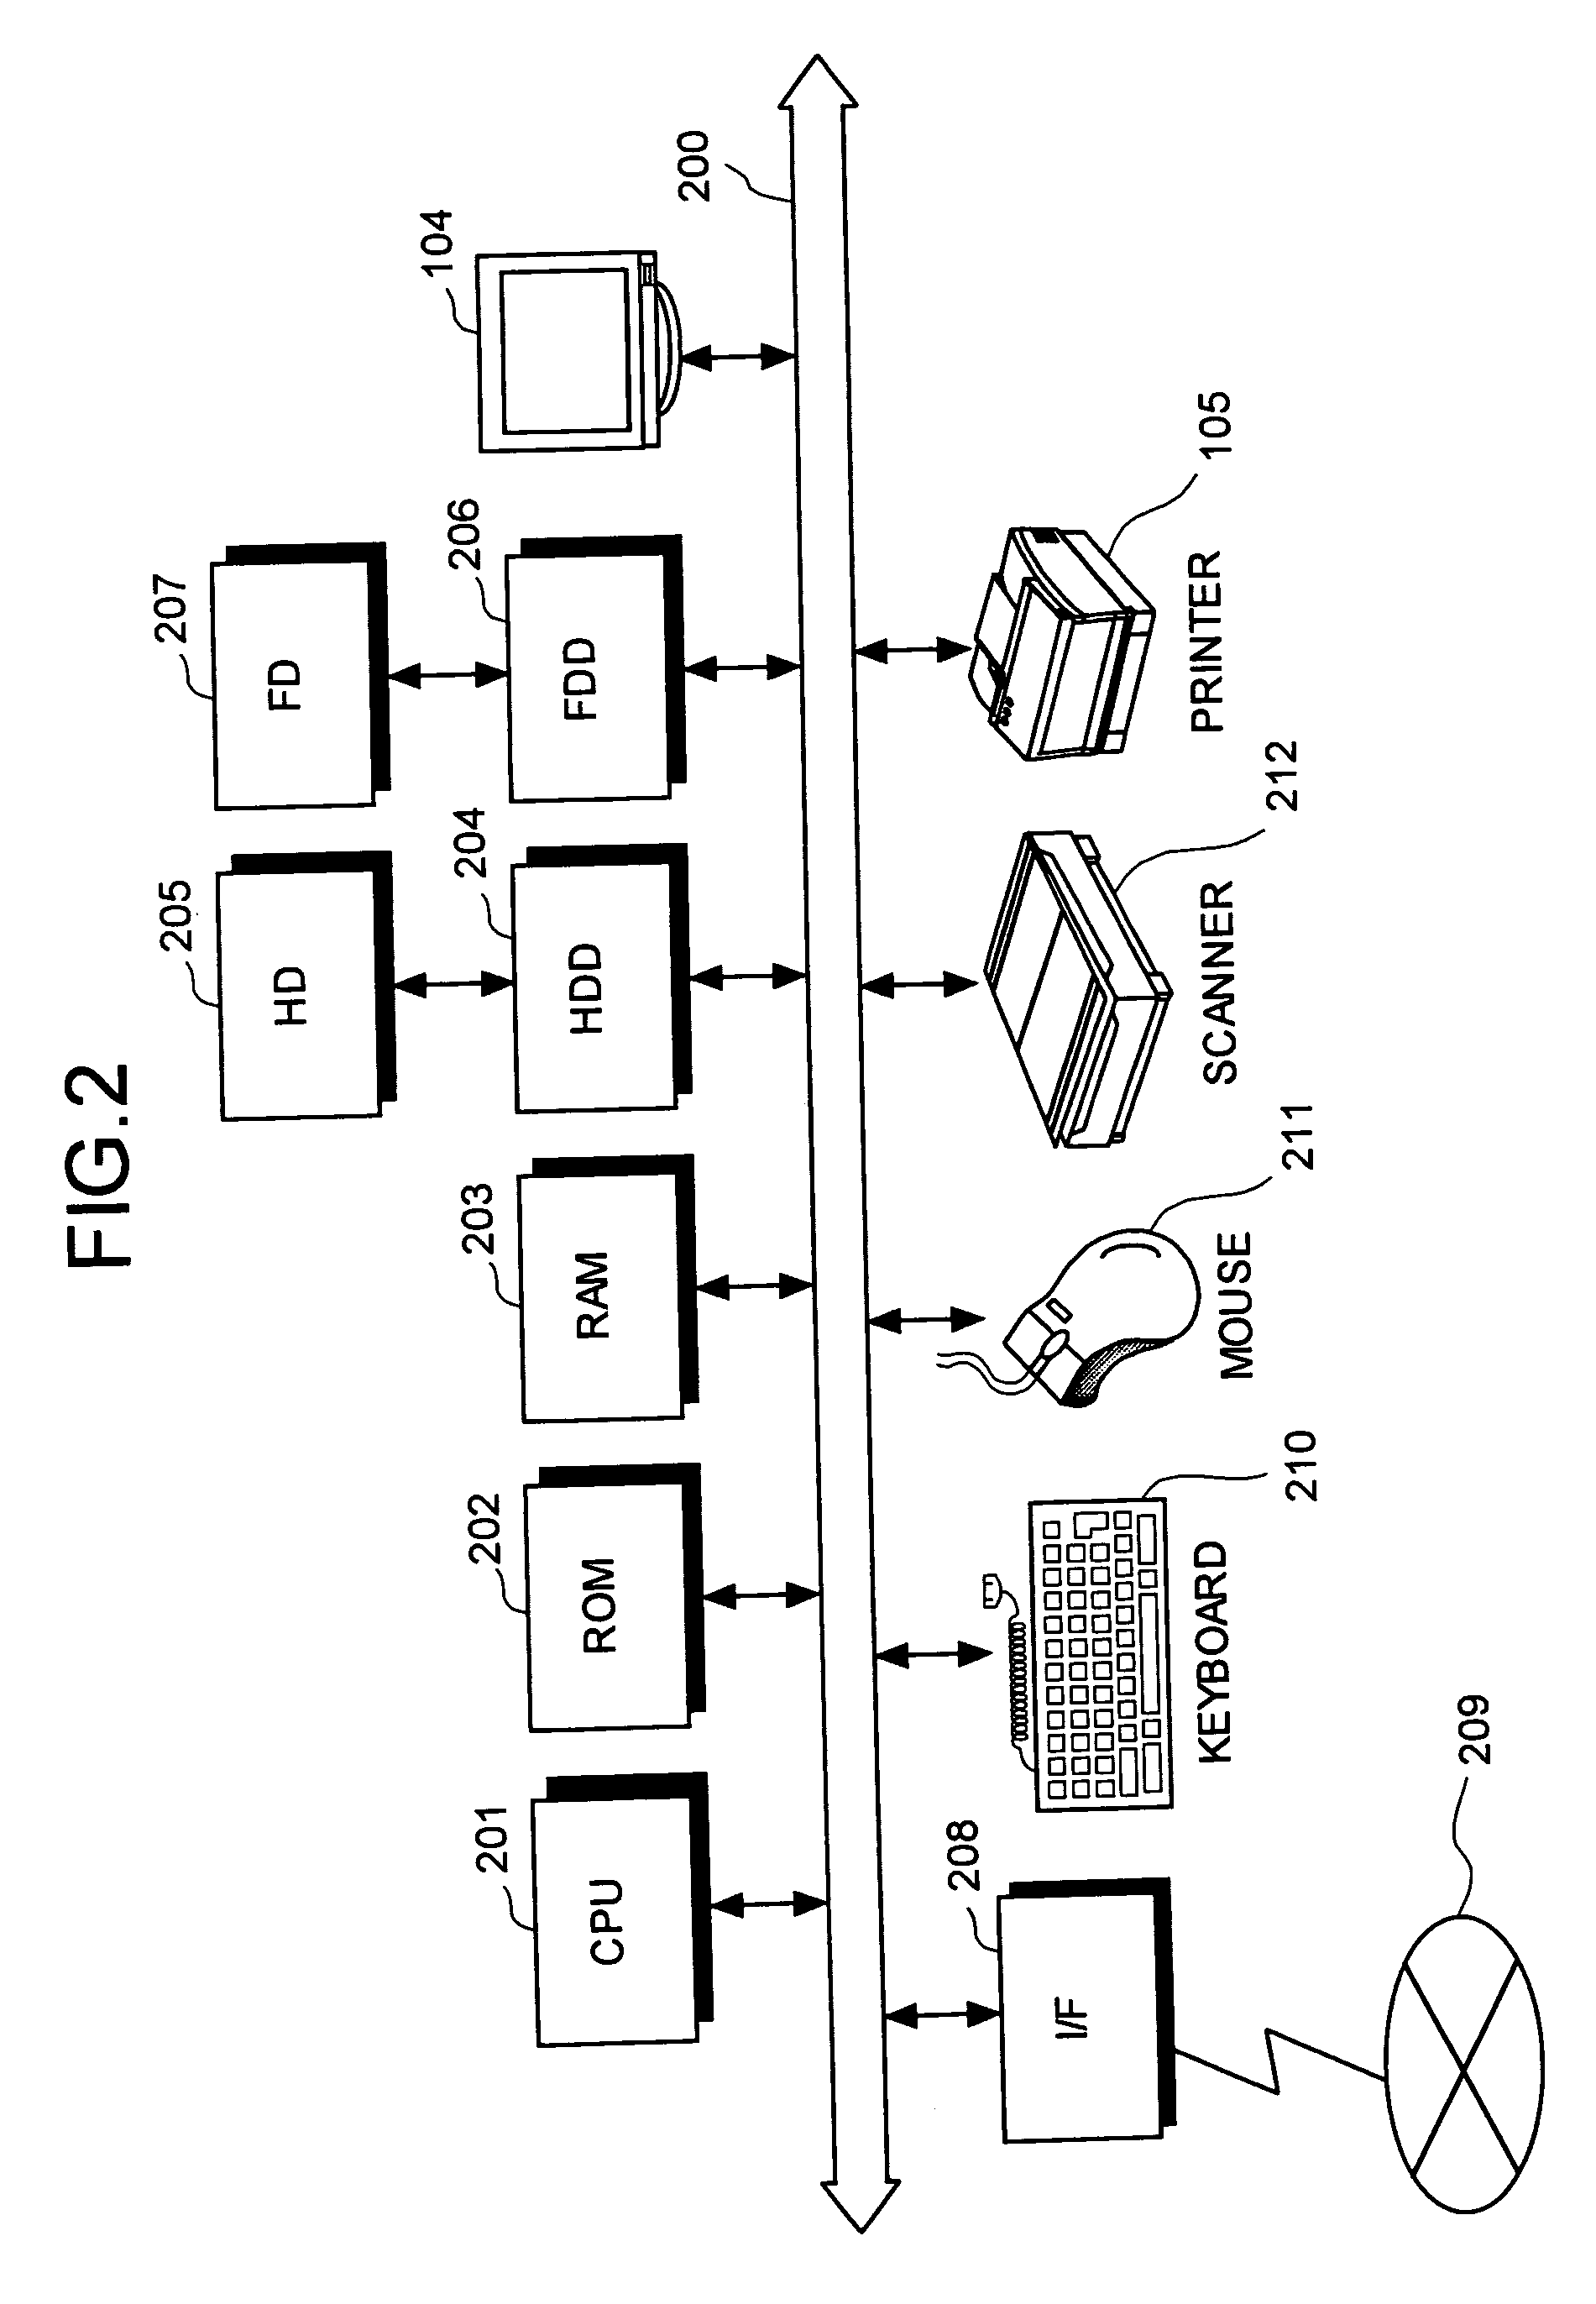 Method for supporting cell image analysis